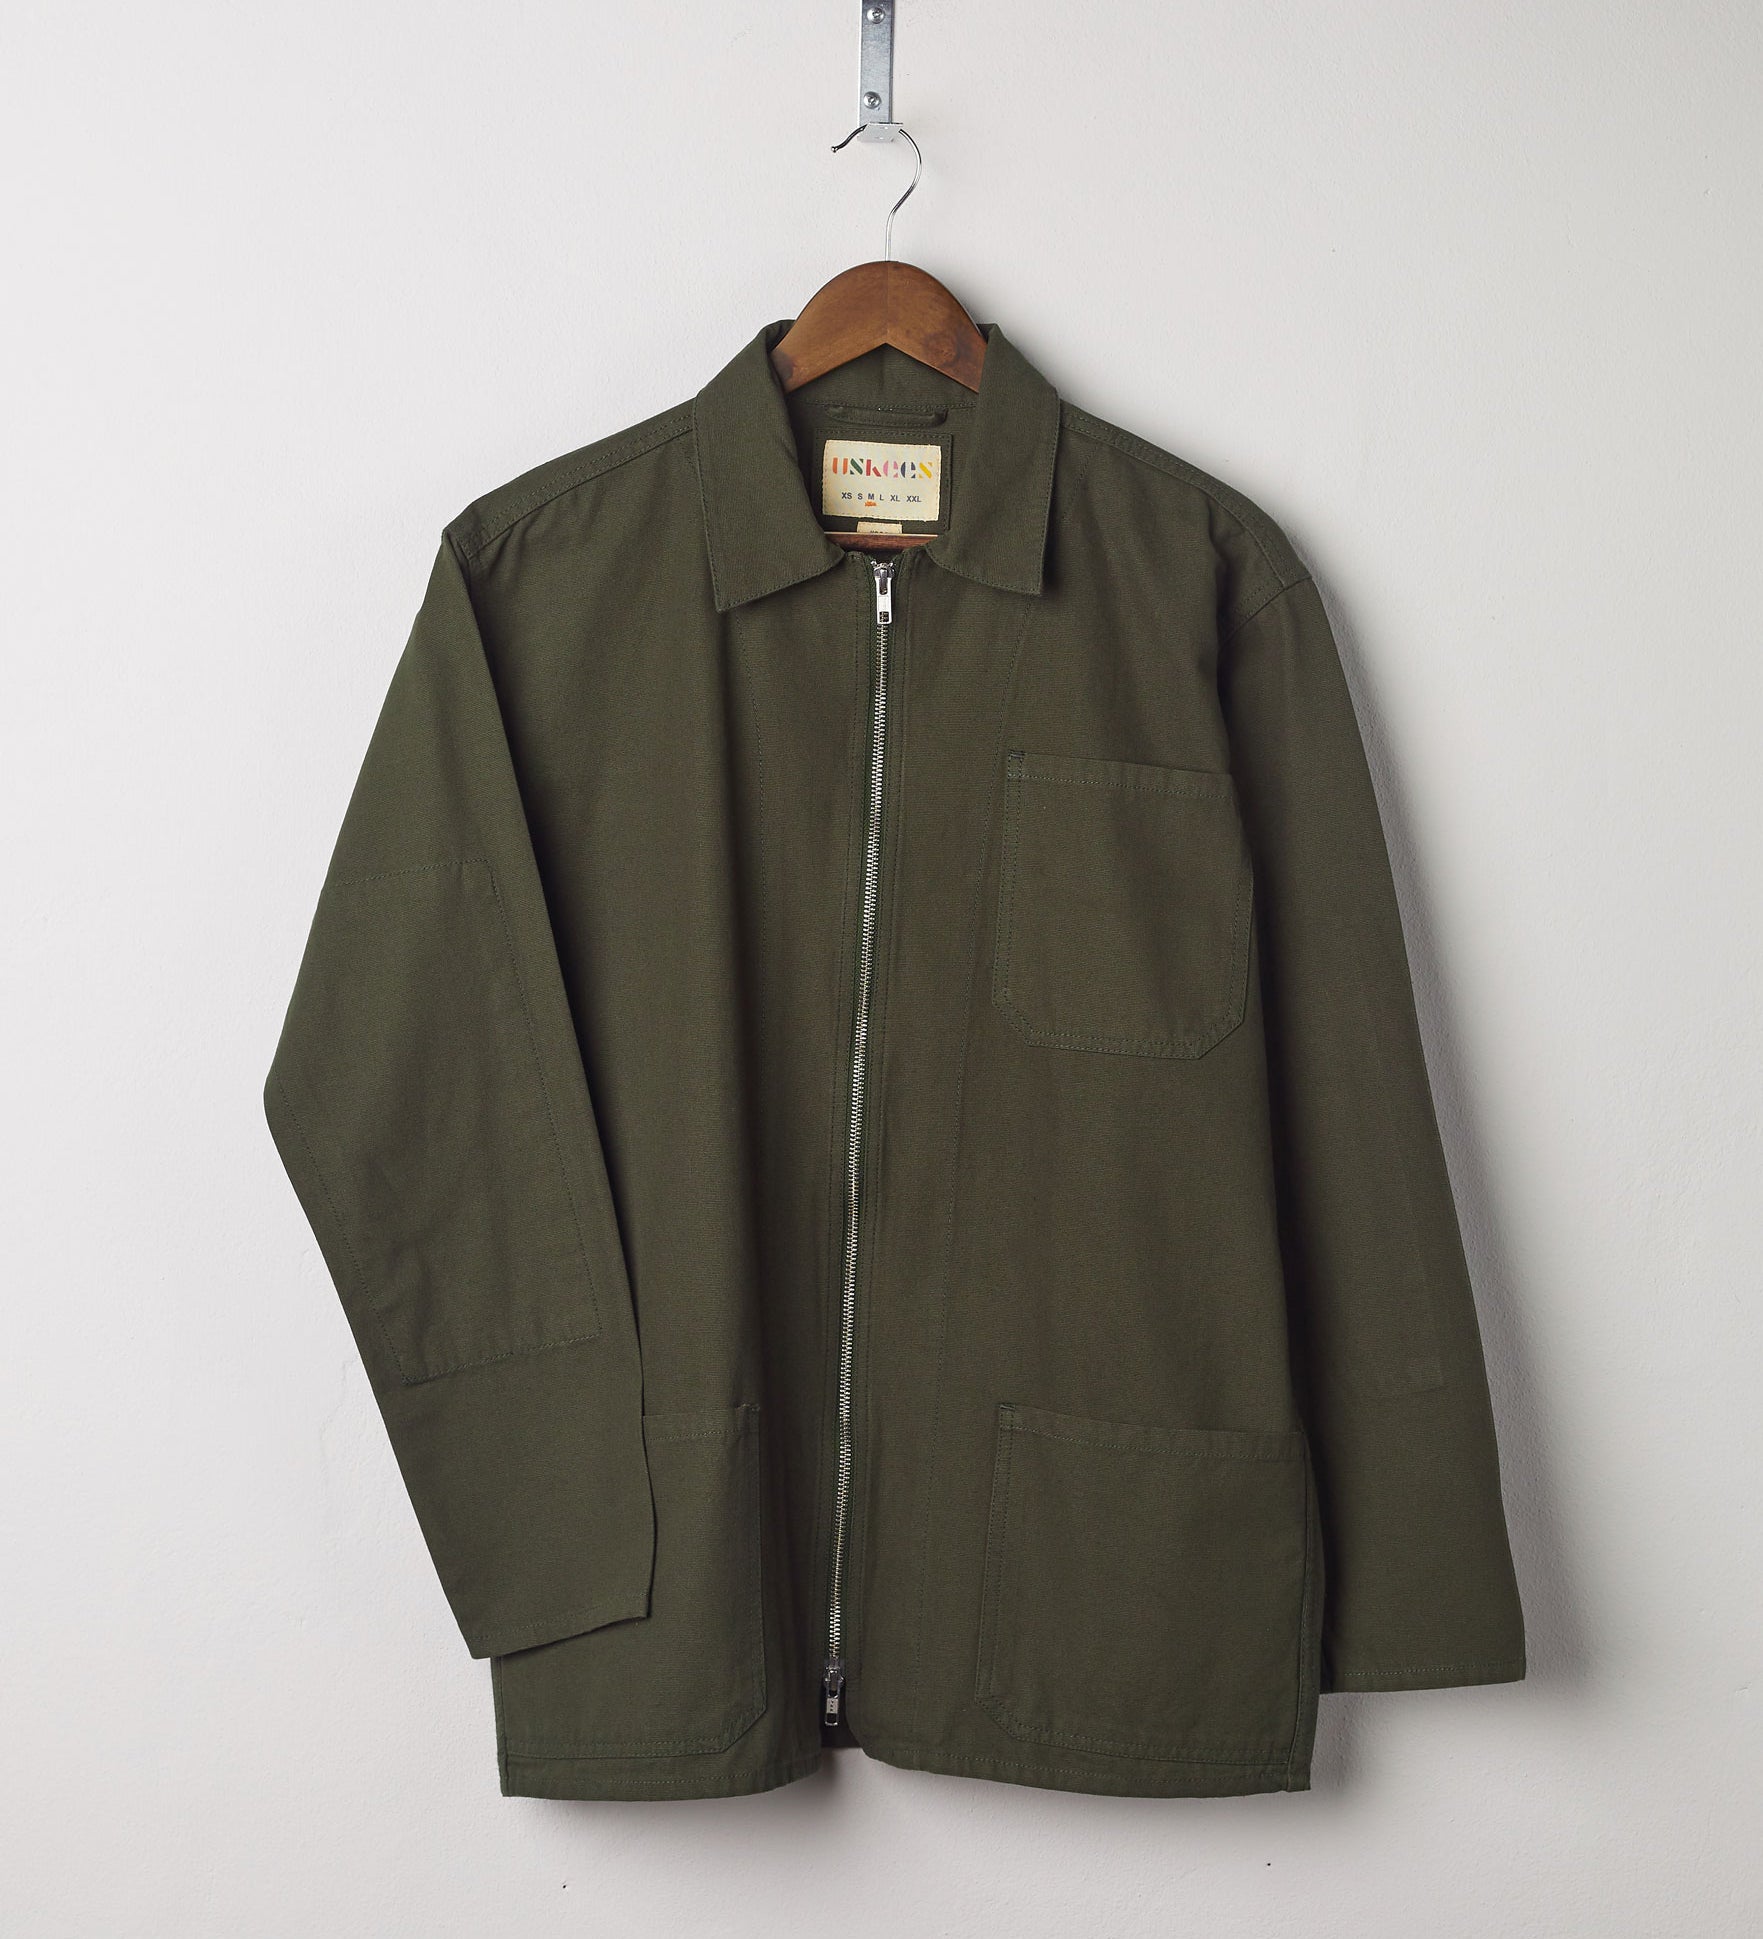 Front view of vine green, organic cotton zip front jacket from Uskees presented on hanger with neutral backdrop.